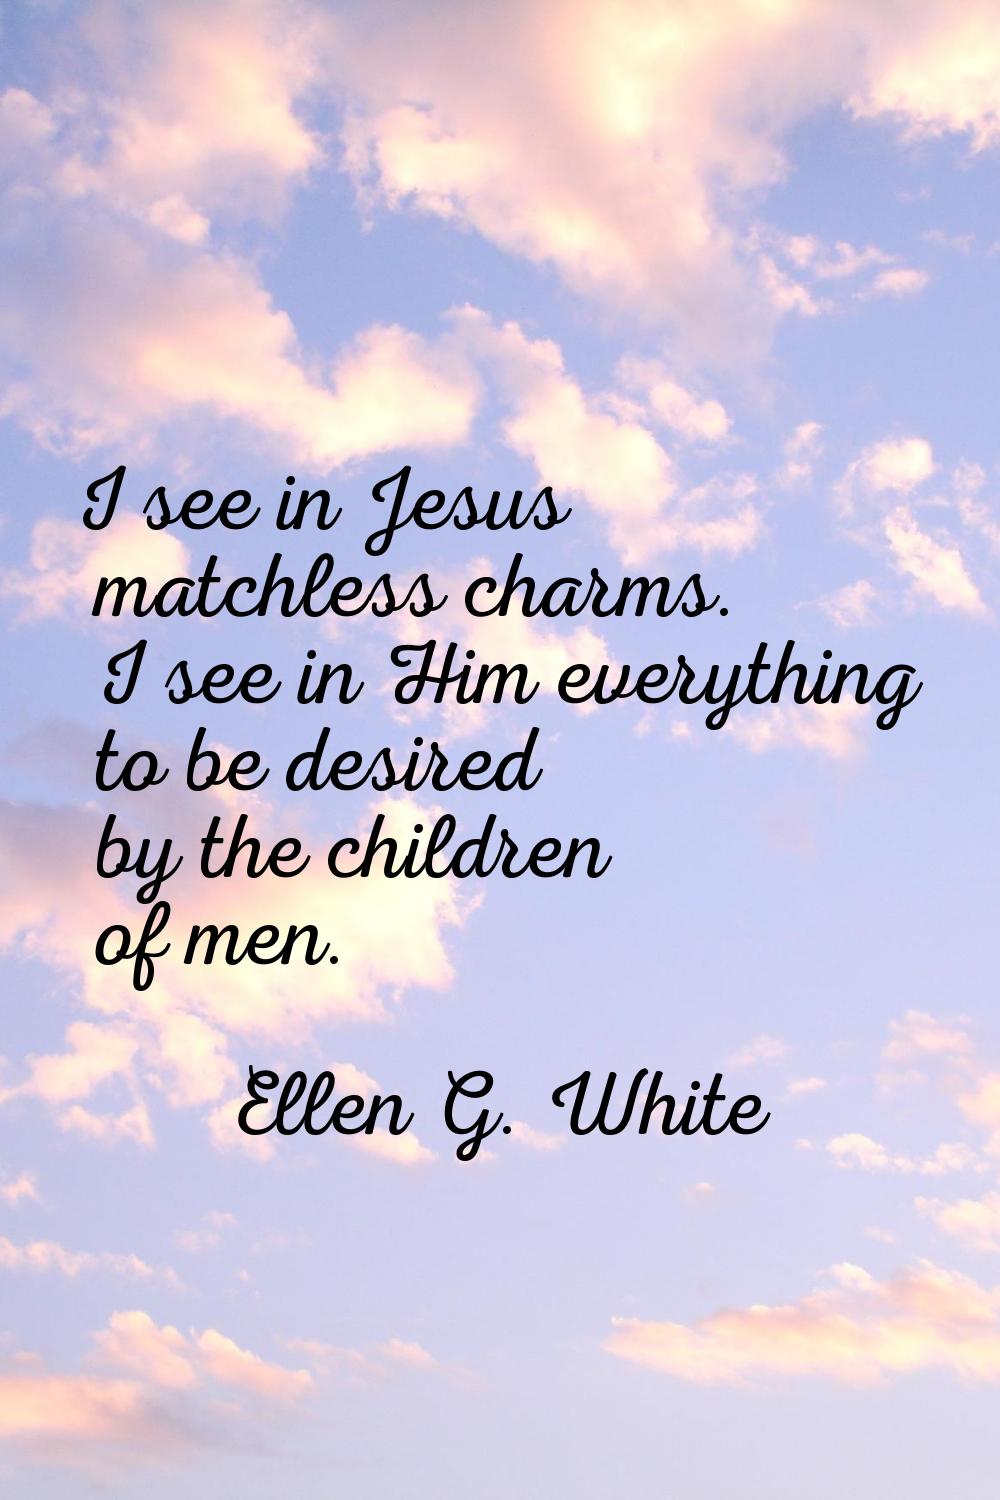 I see in Jesus matchless charms. I see in Him everything to be desired by the children of men.